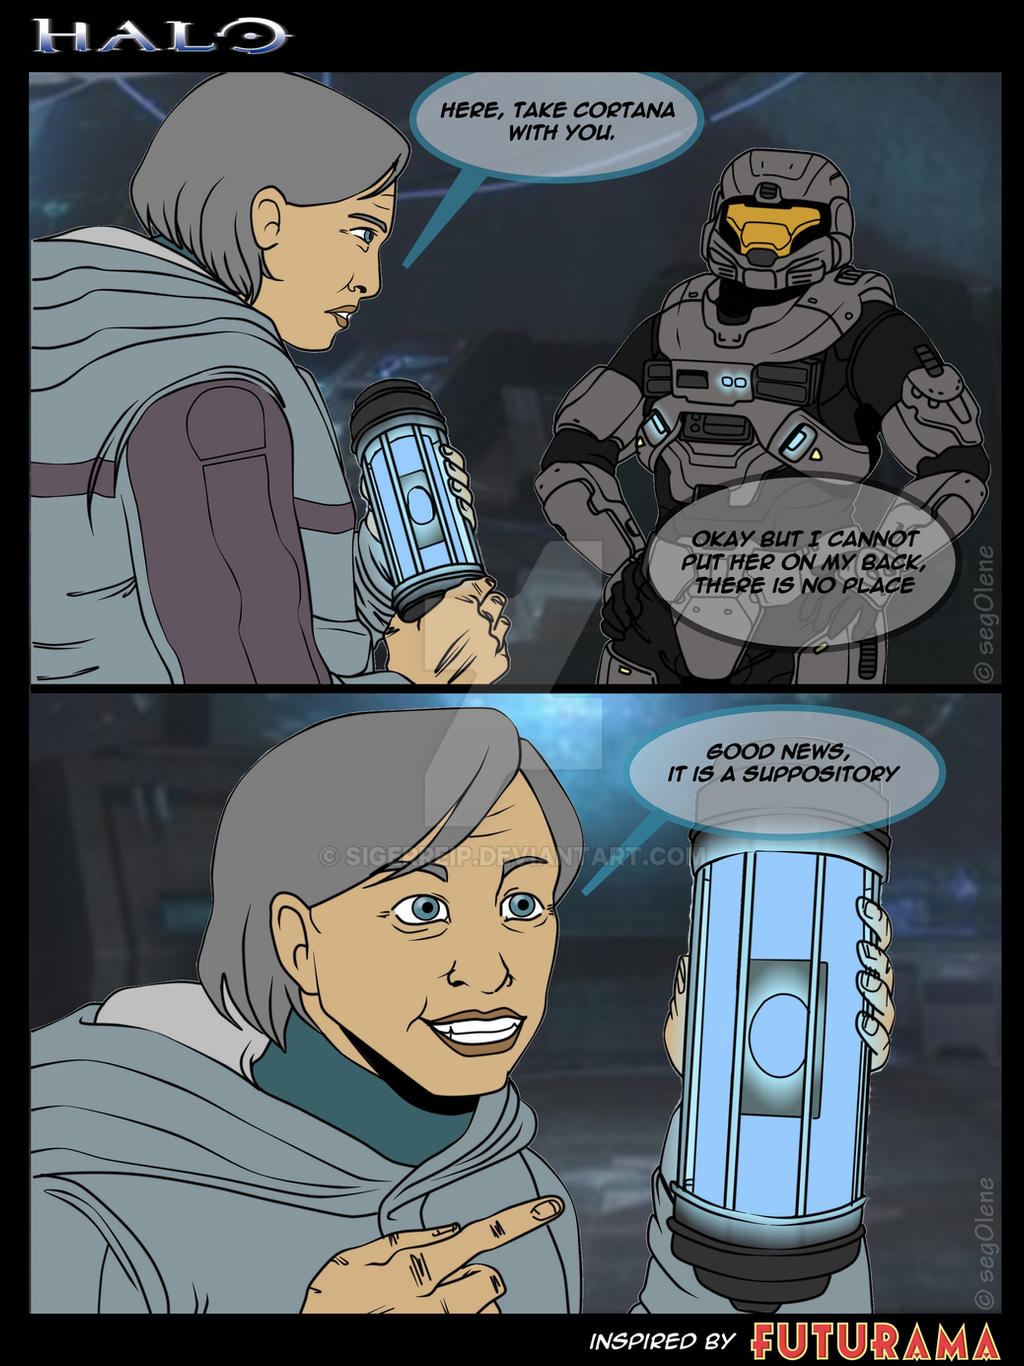 comic] Halo - It is a suppository by Sigerreip on DeviantArt